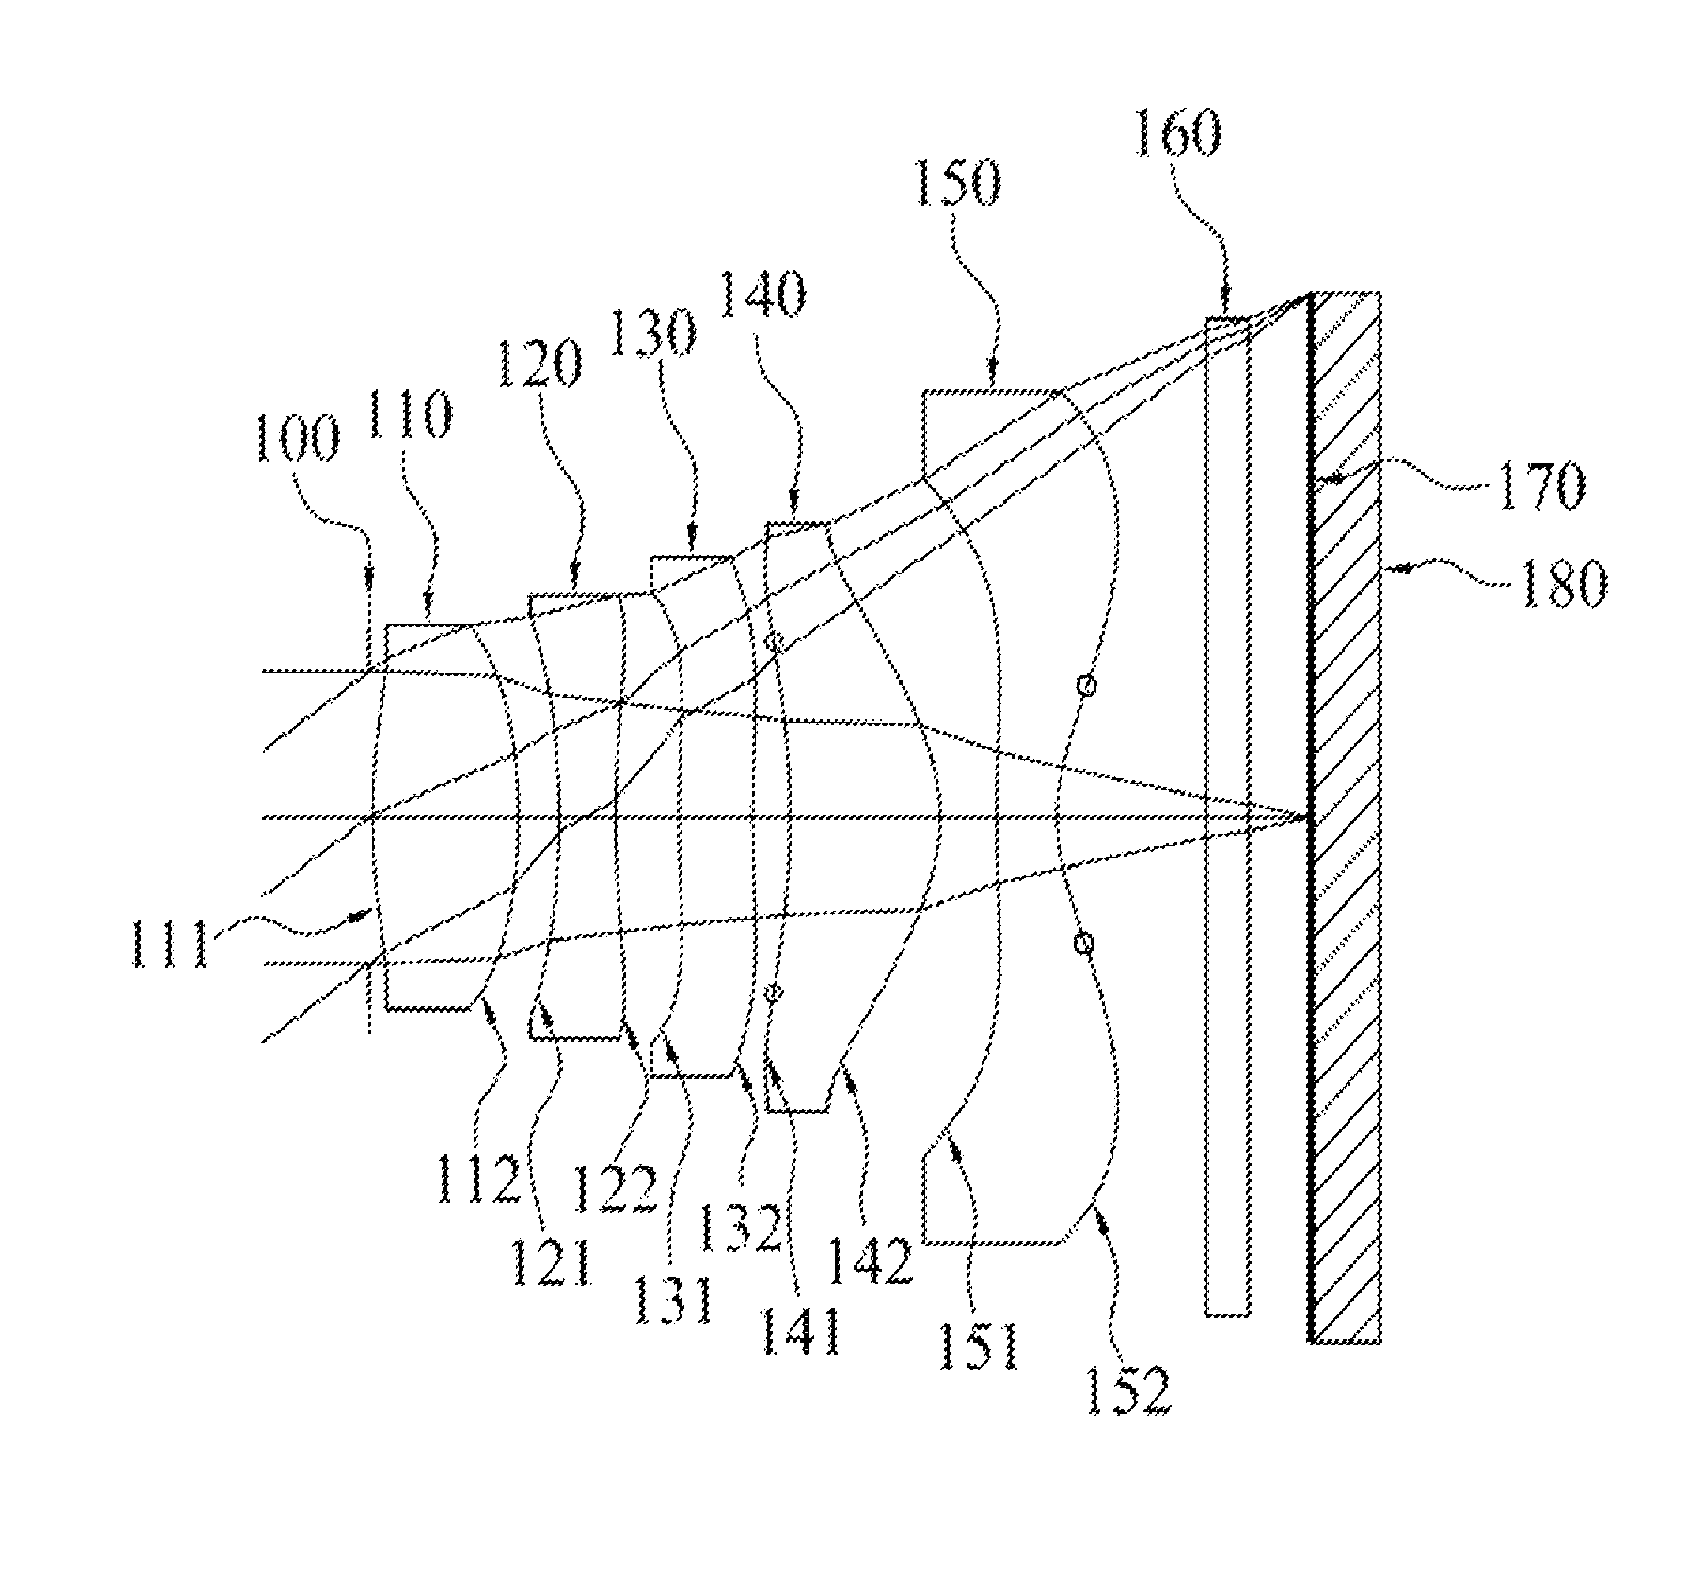 Optical system for imaging pickup